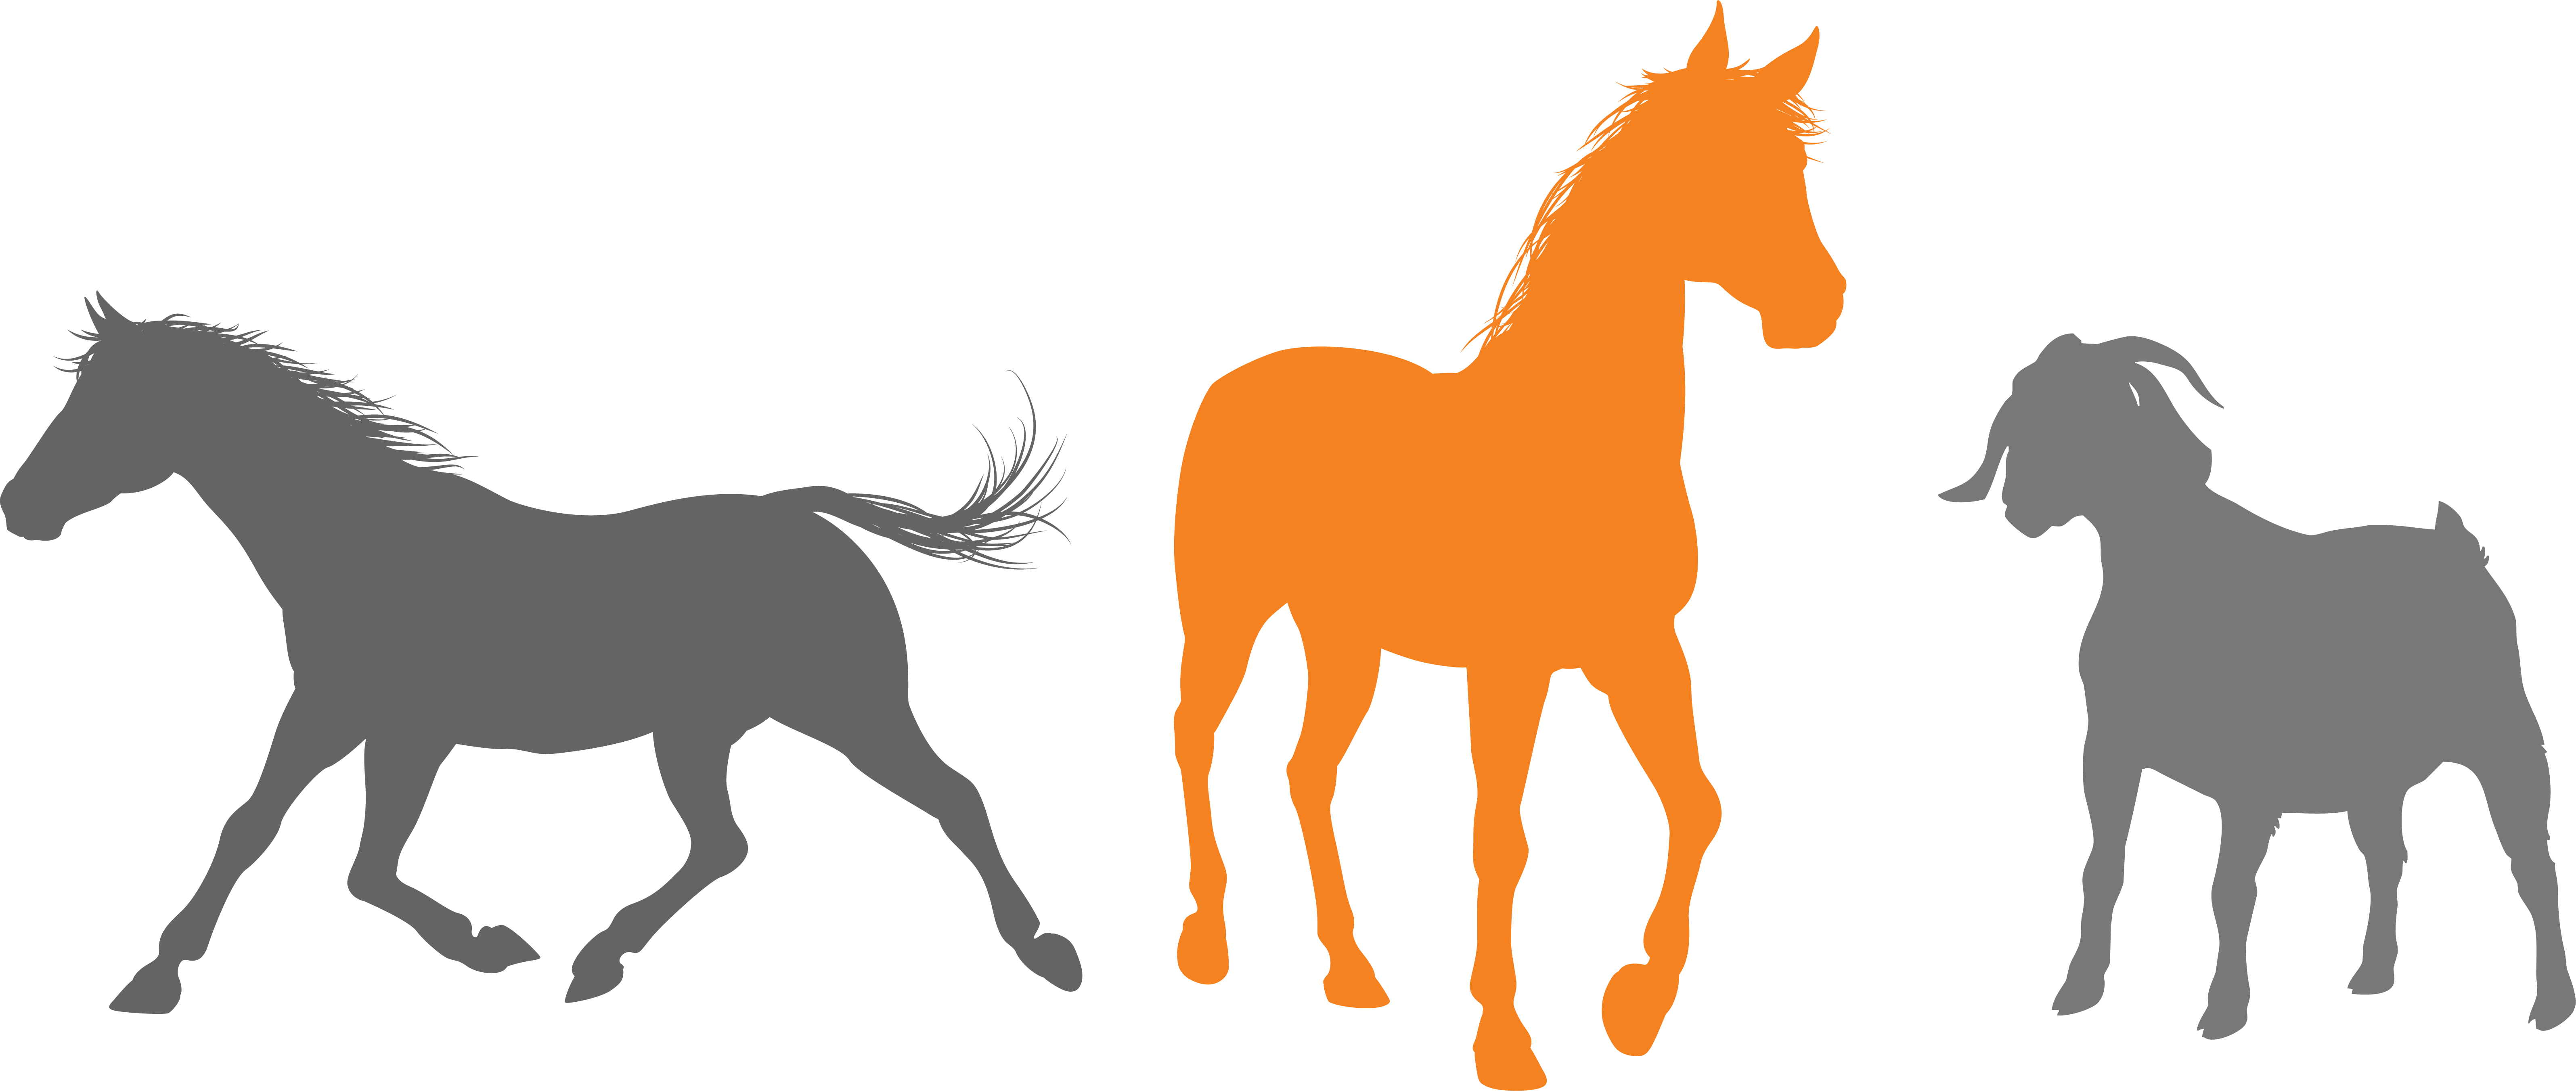 Silhouette of two horses and a goat